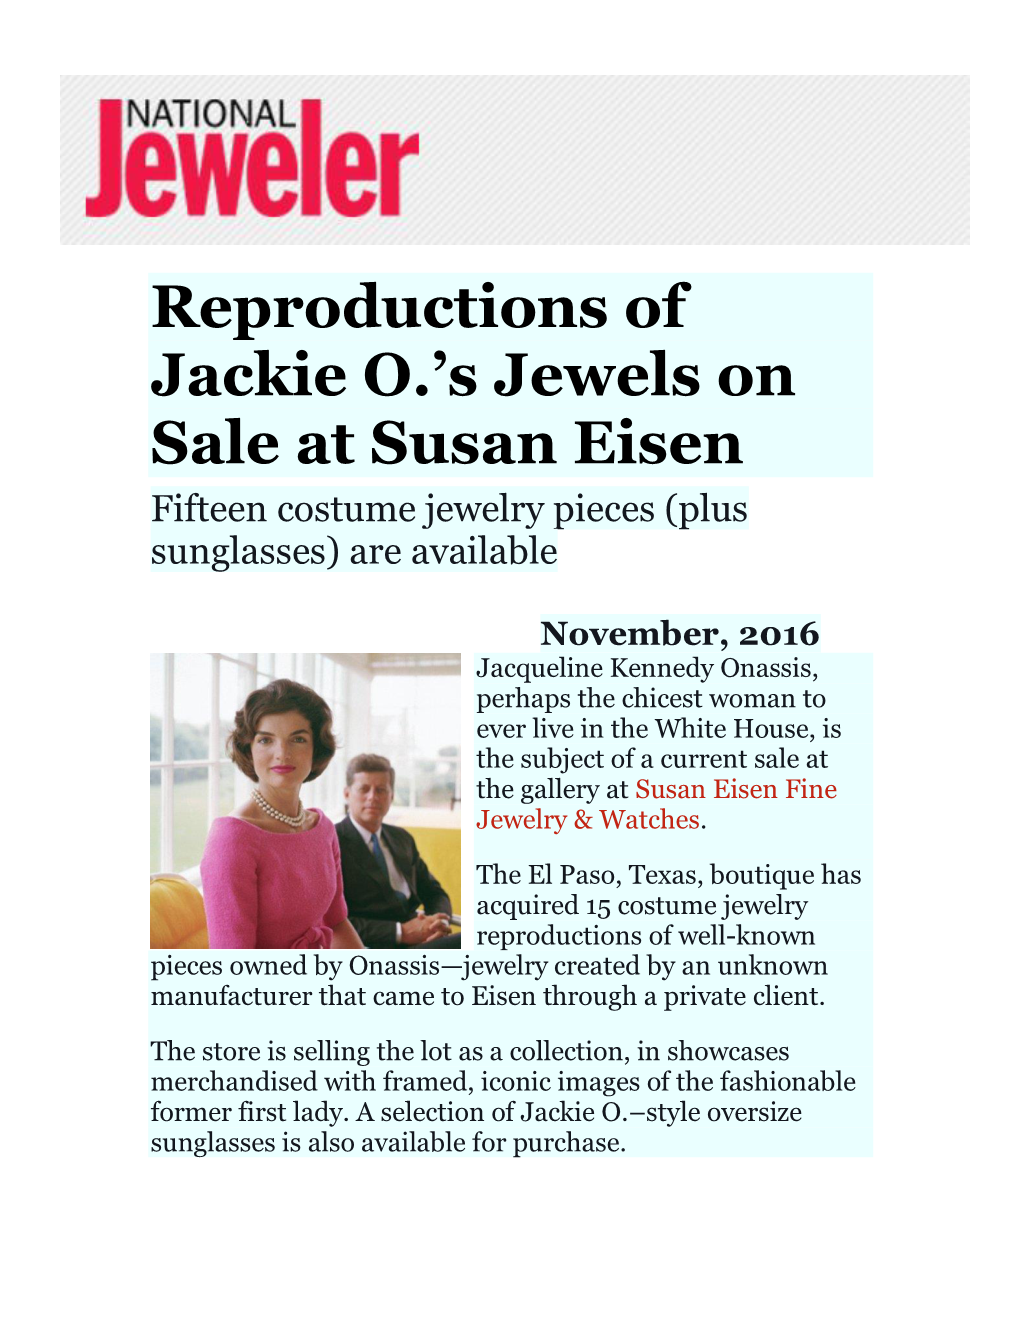 Reproductions of Jackie O.’S Jewels on Sale at Susan Eisen Fifteen Costume Jewelry Pieces (Plus Sunglasses) Are Available